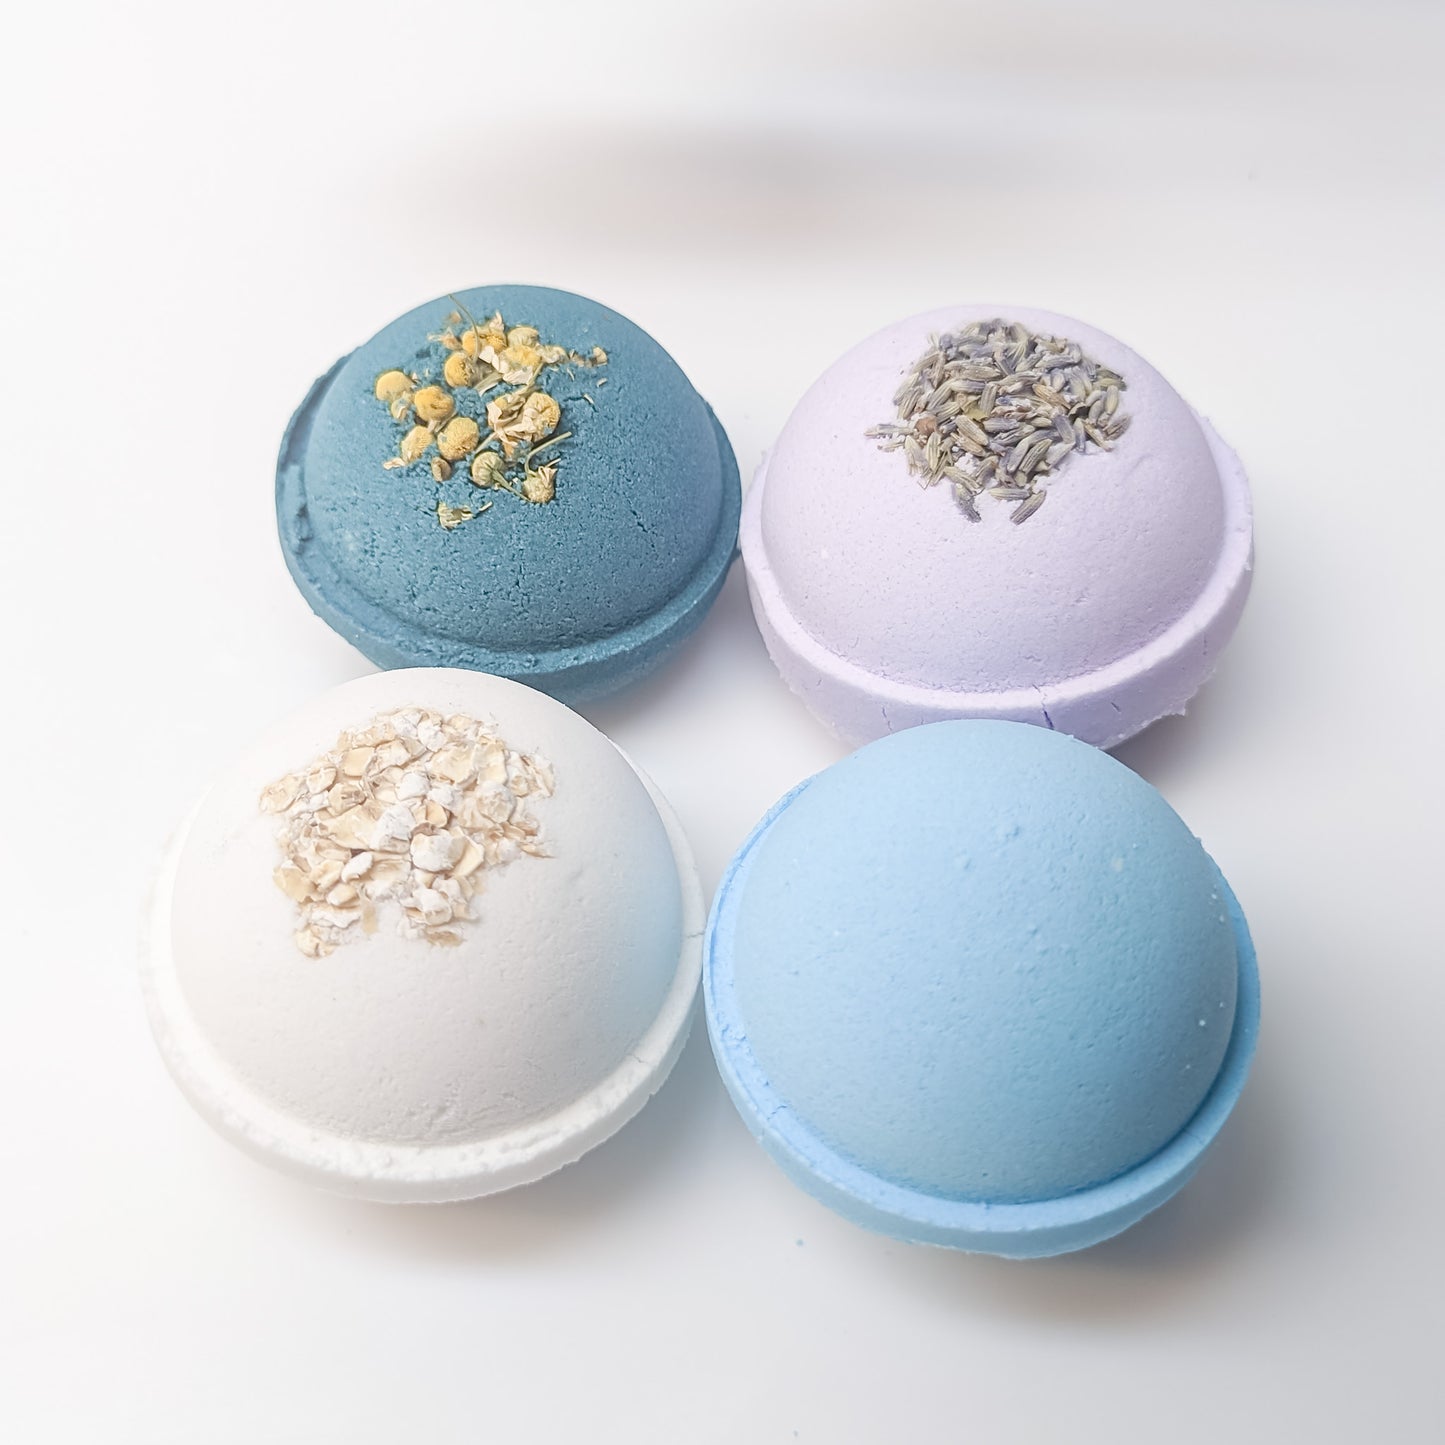 Fizzing Blue Chamomile Bath Bomb, releasing the moisturizing properties of cocoa butter and avocado oil for ultimate skin nourishment | CG Pure Wash.